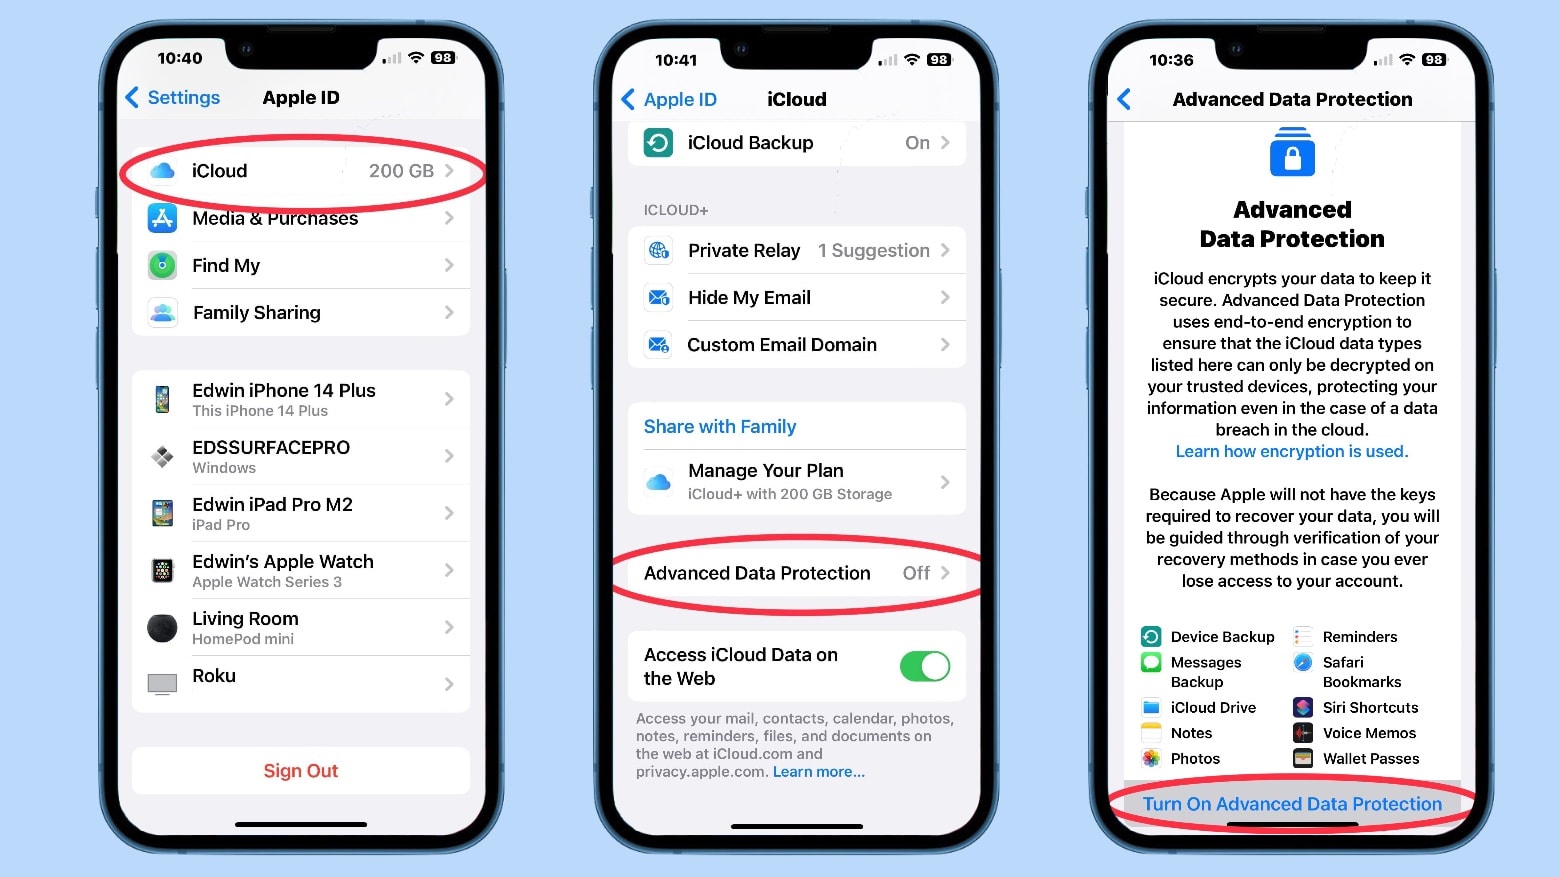 A screenshot of an iPhone's Settings app shows how to activate Advanced Data Protection for iCloud. Follow these simple steps to encrypt more iCloud data.